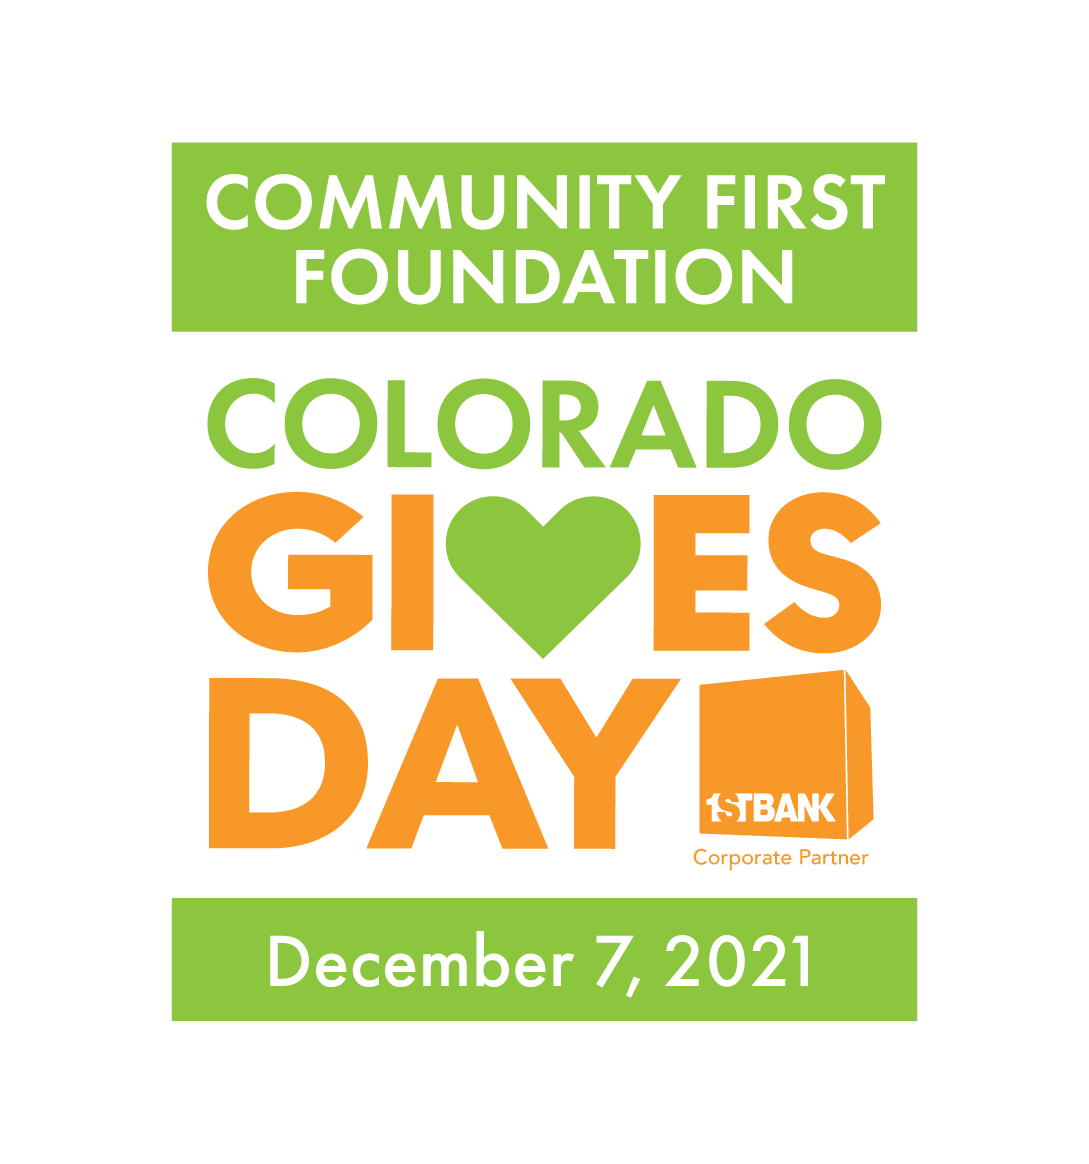 Colorado Gives Day Toolkit   Community First Foundation